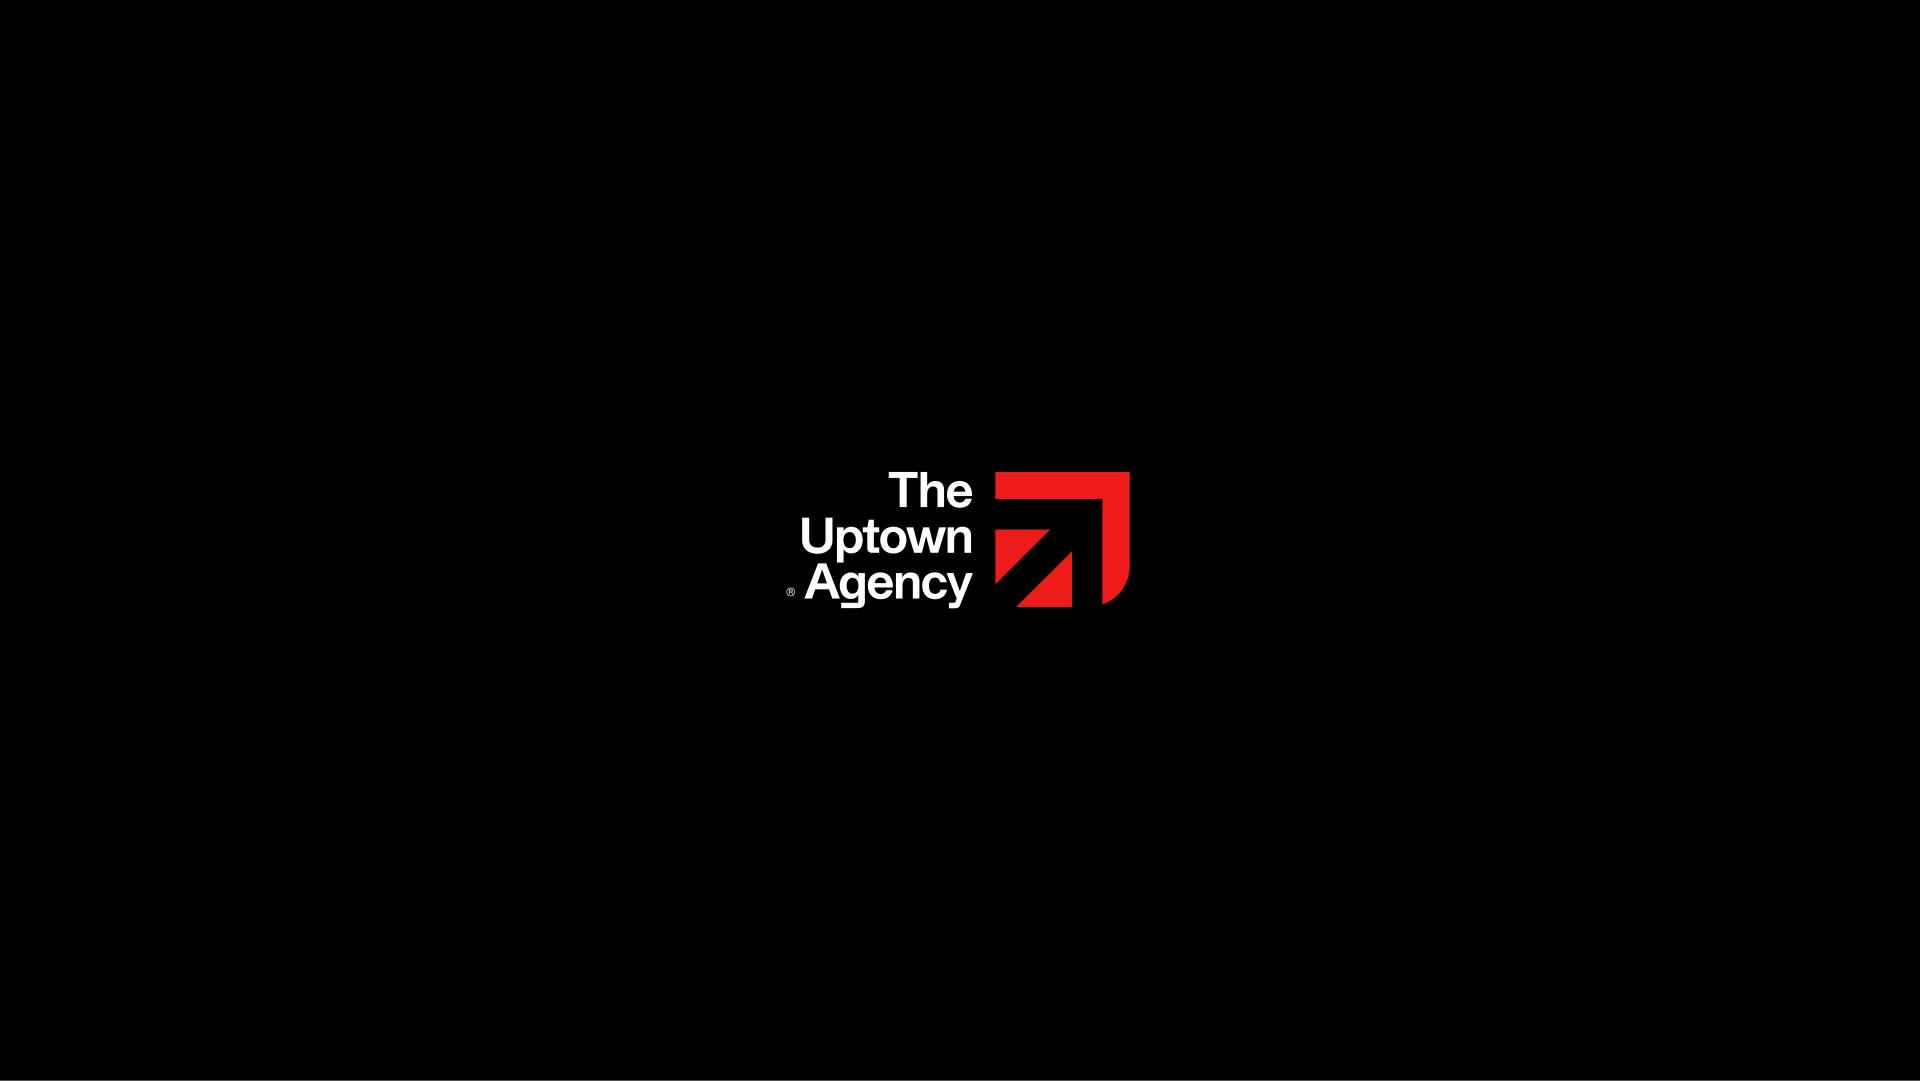 The Uptown Agency brand logo on a black background